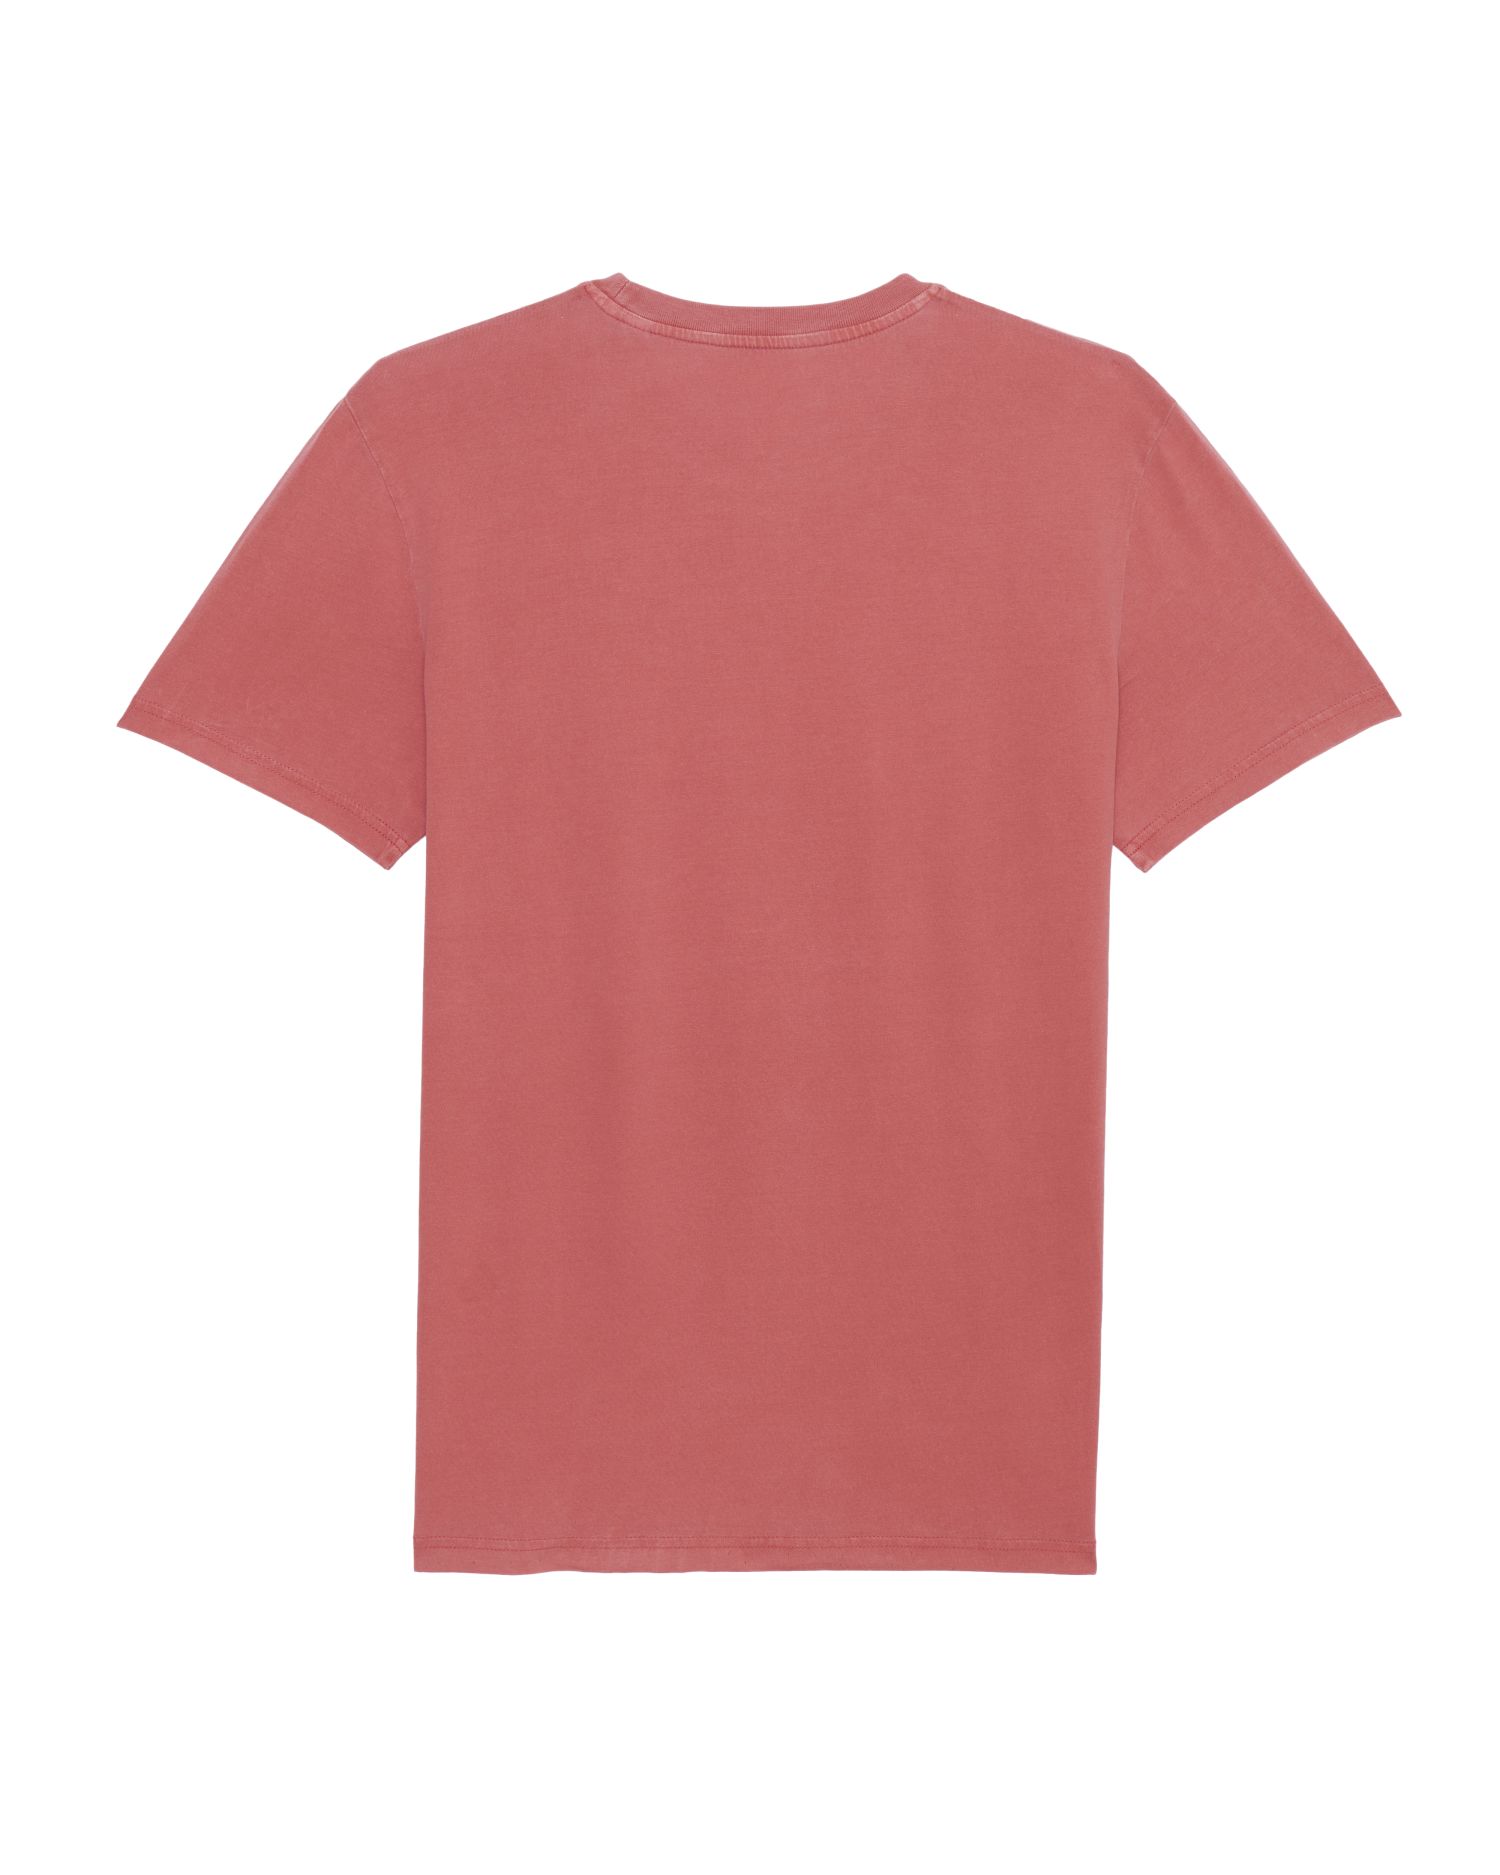 T-Shirt Creator Vintage in Farbe G. Dyed Carmine Red